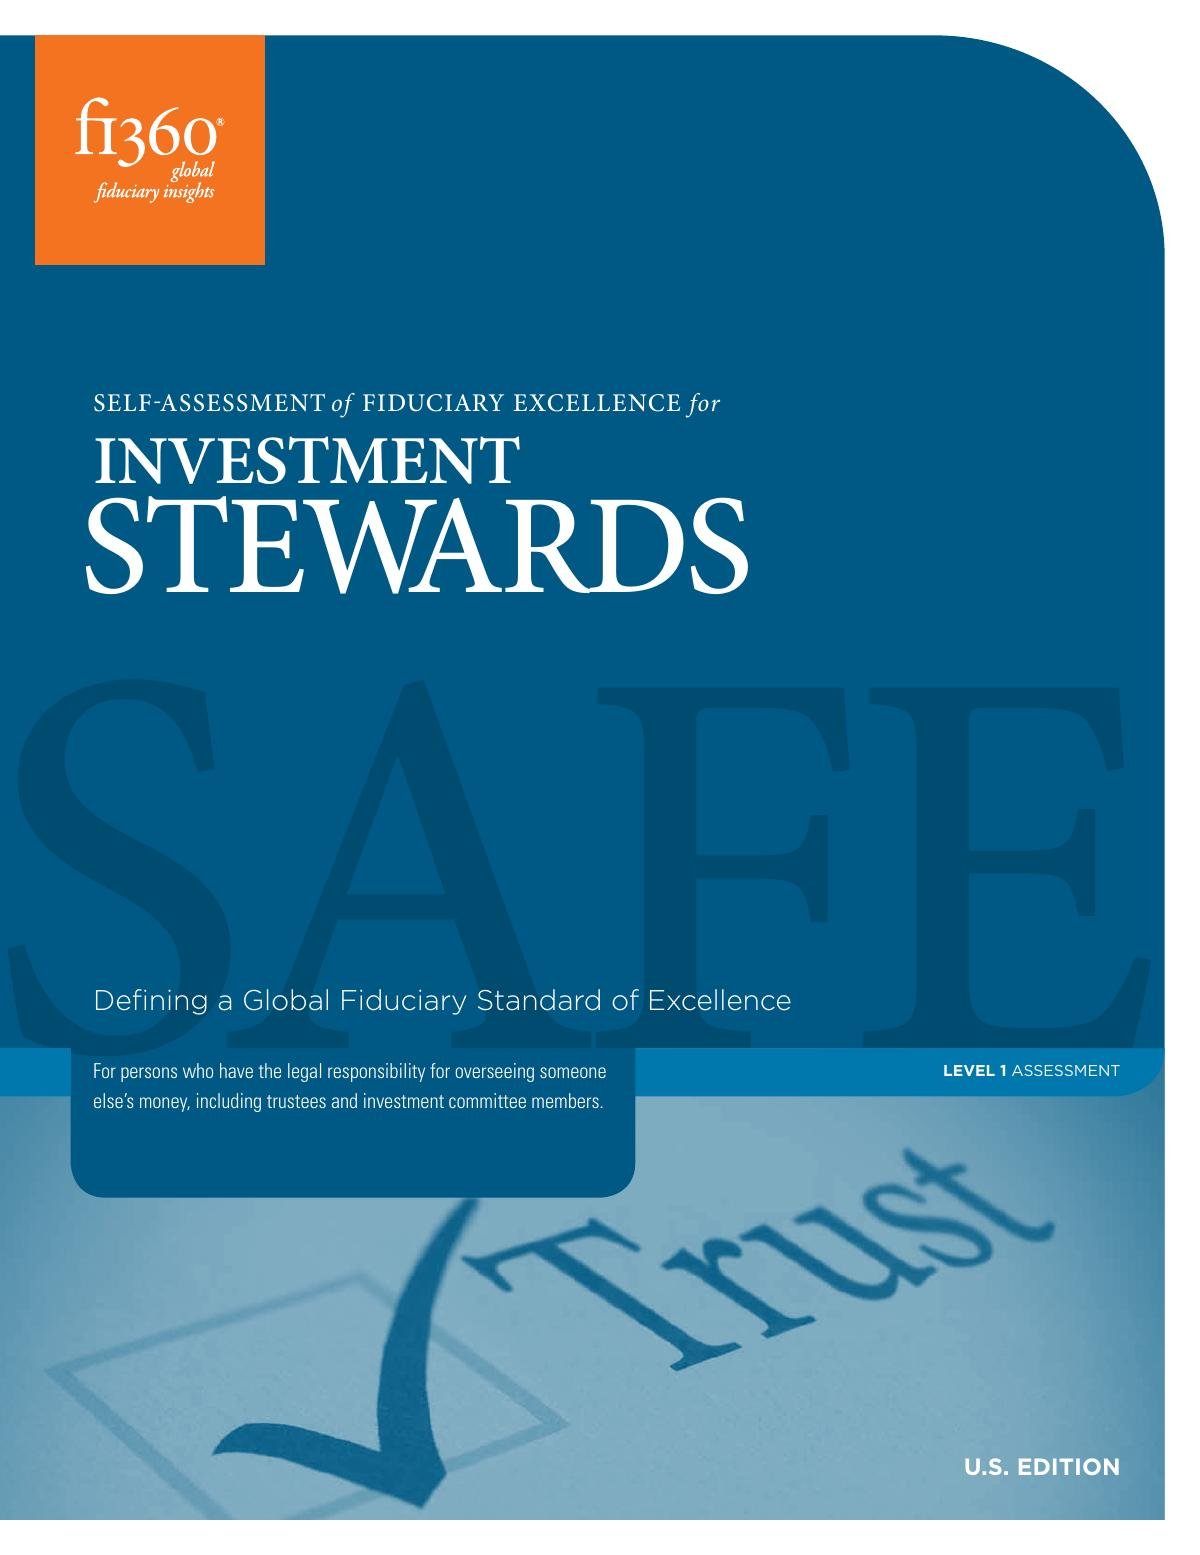 Self-Assessment of Fiduciary Excellence for Investment Stewards